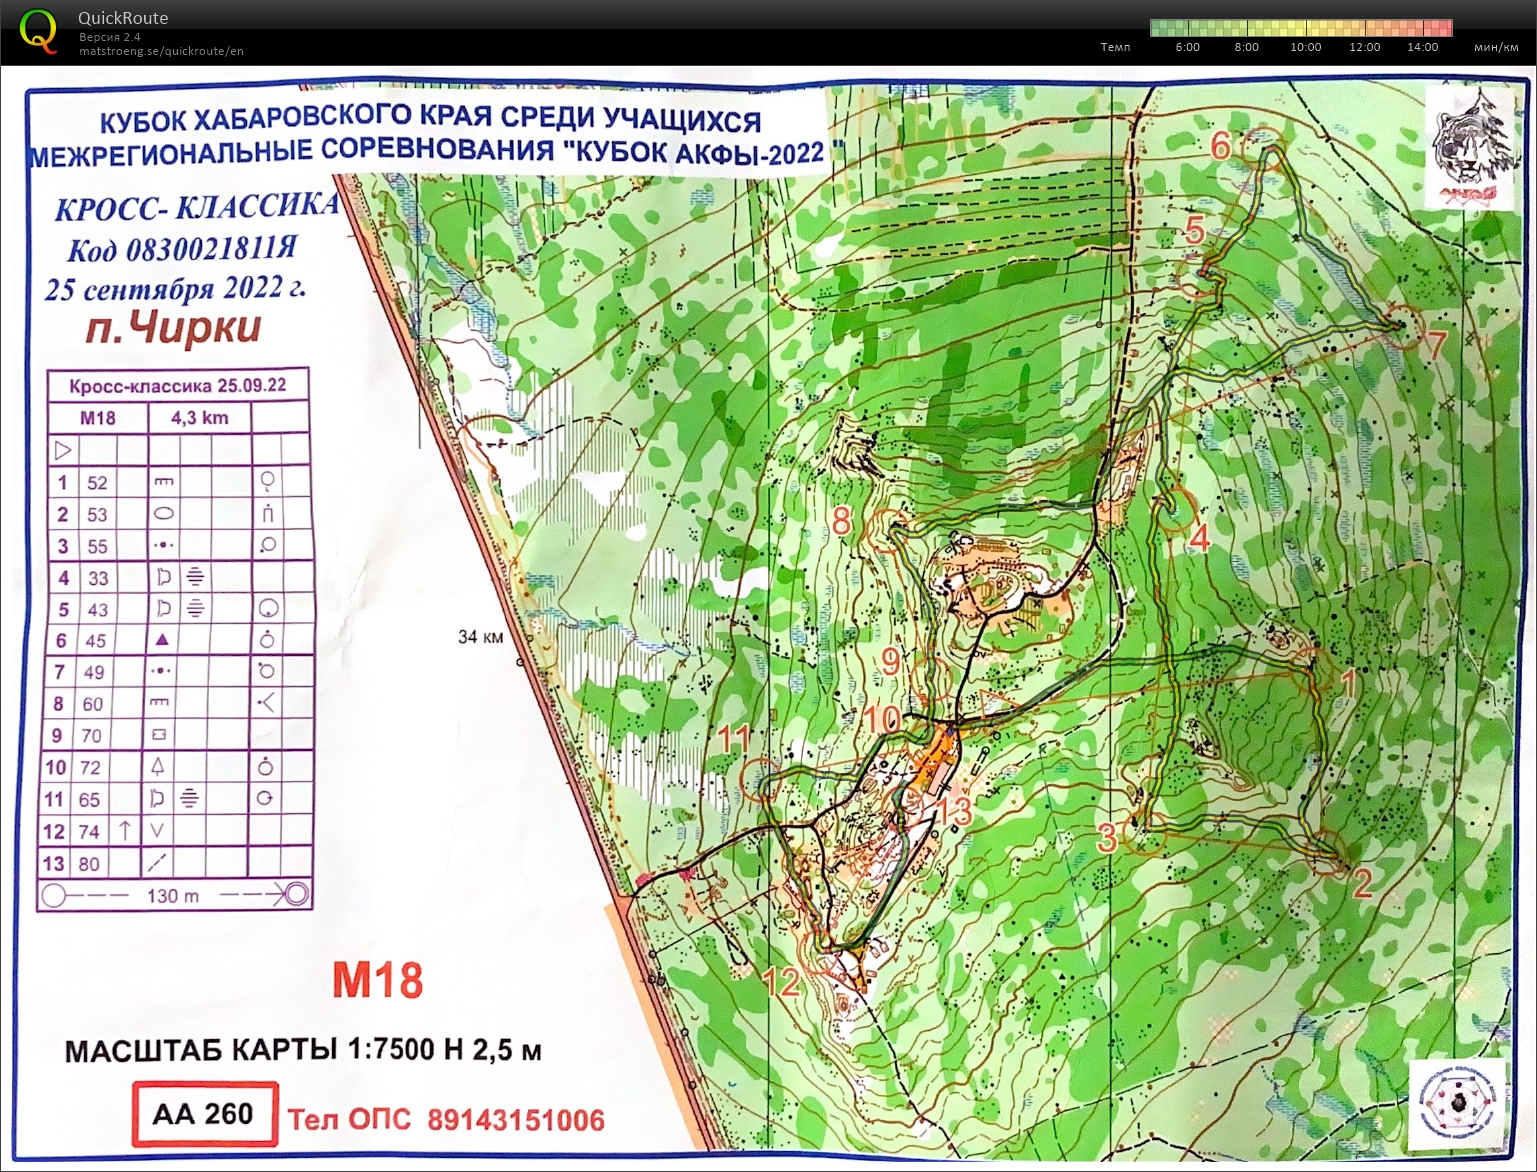 Map with track - Кубок Акфы Финал, area - Чирки, from orienteering map archive of Konstantin Borodin